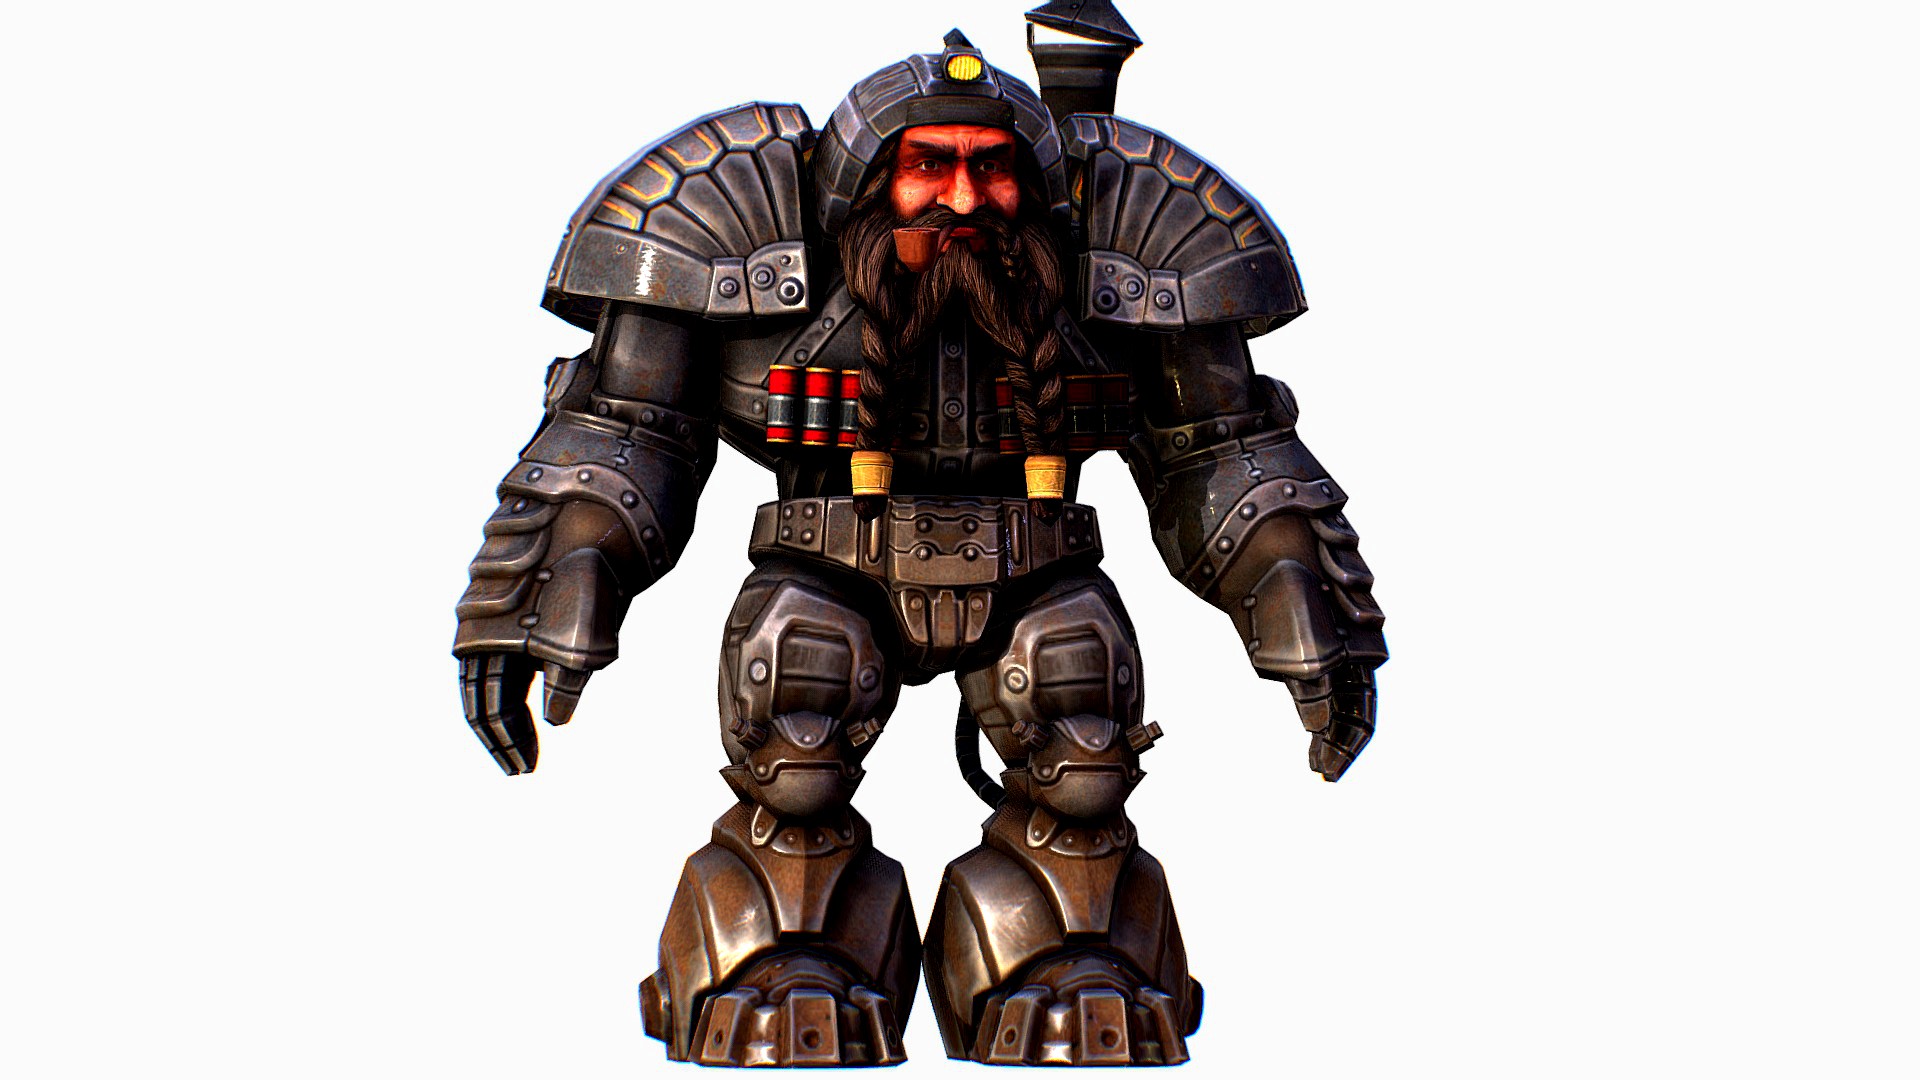 Game Character Mailed Armored Metal Gnome Robot